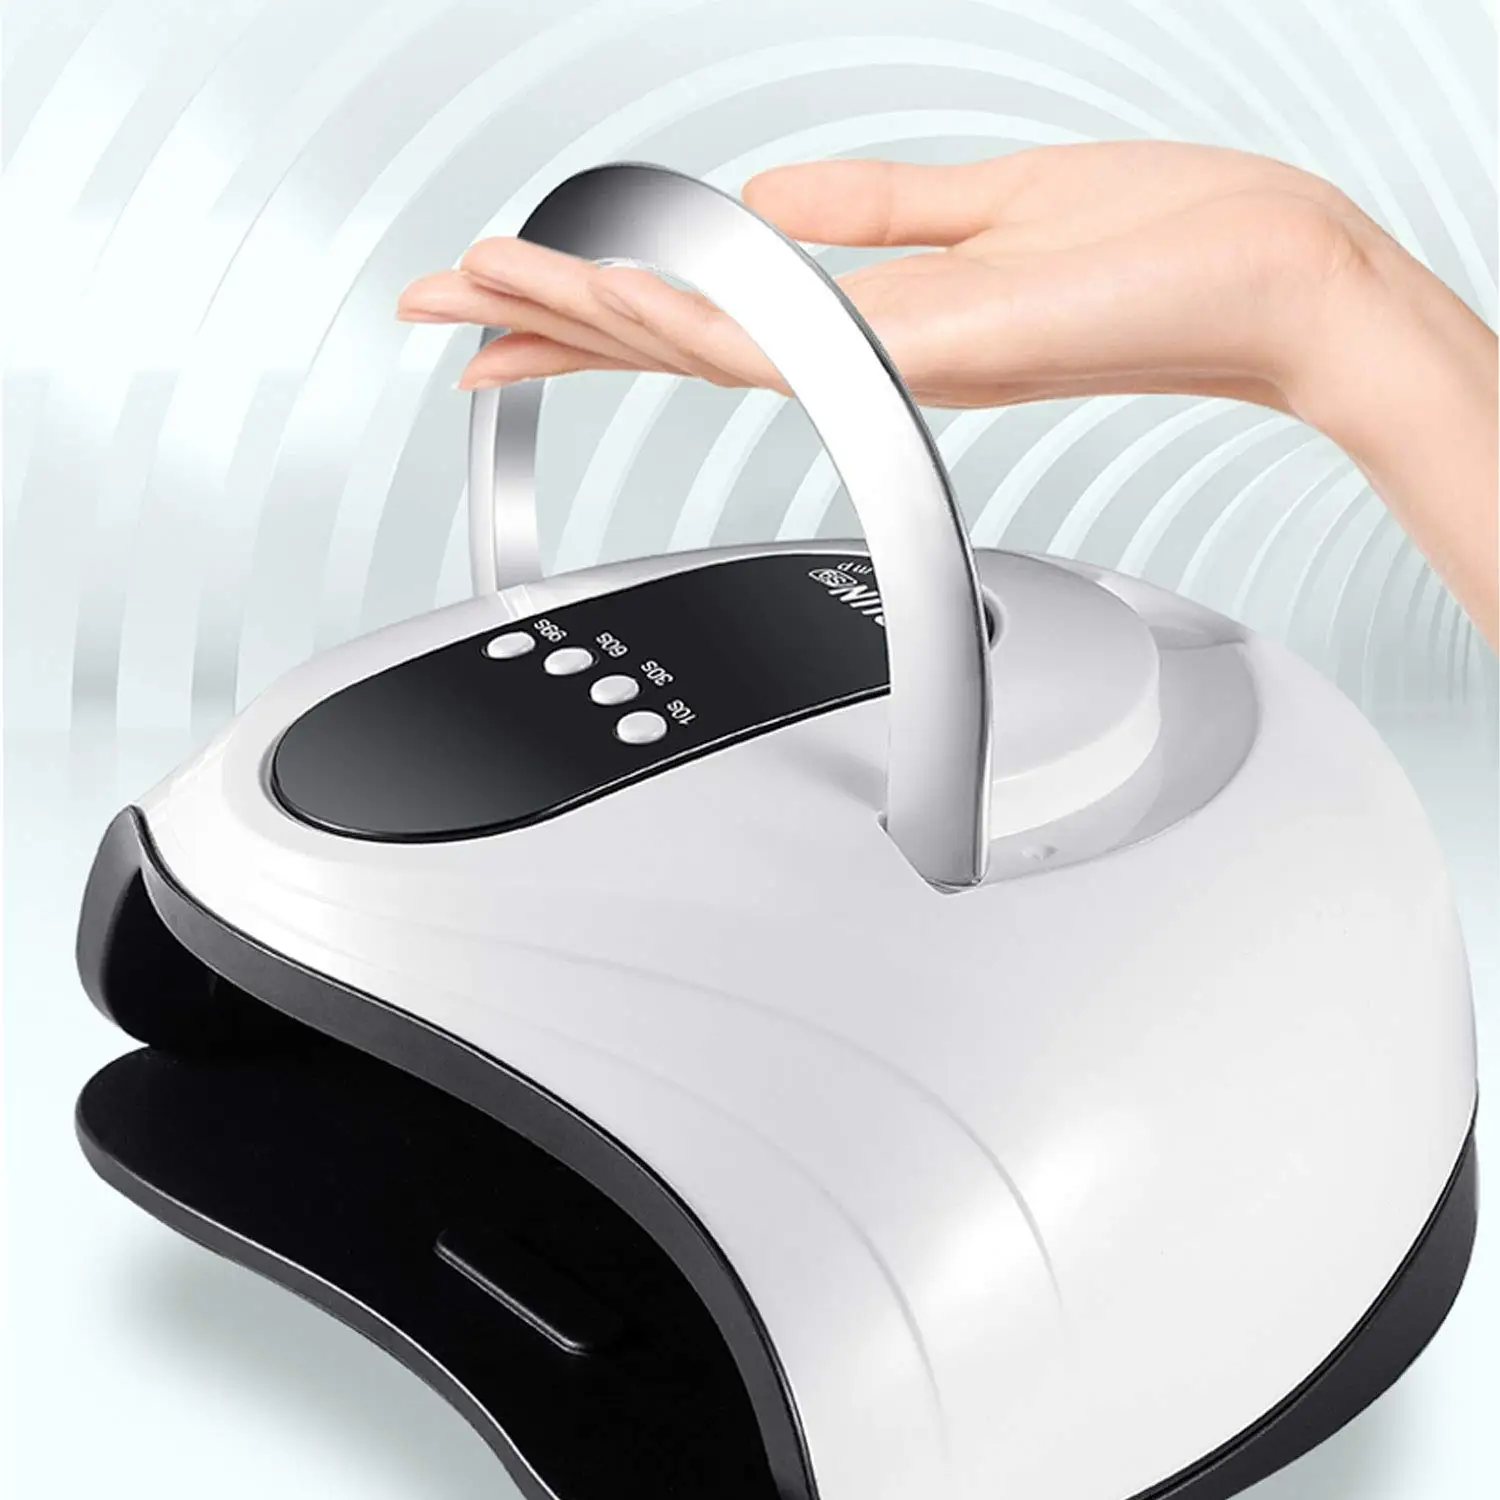 

Sales 01 2020 new 120W portable handle curing UV LED lamp gel polish faster nail dryer